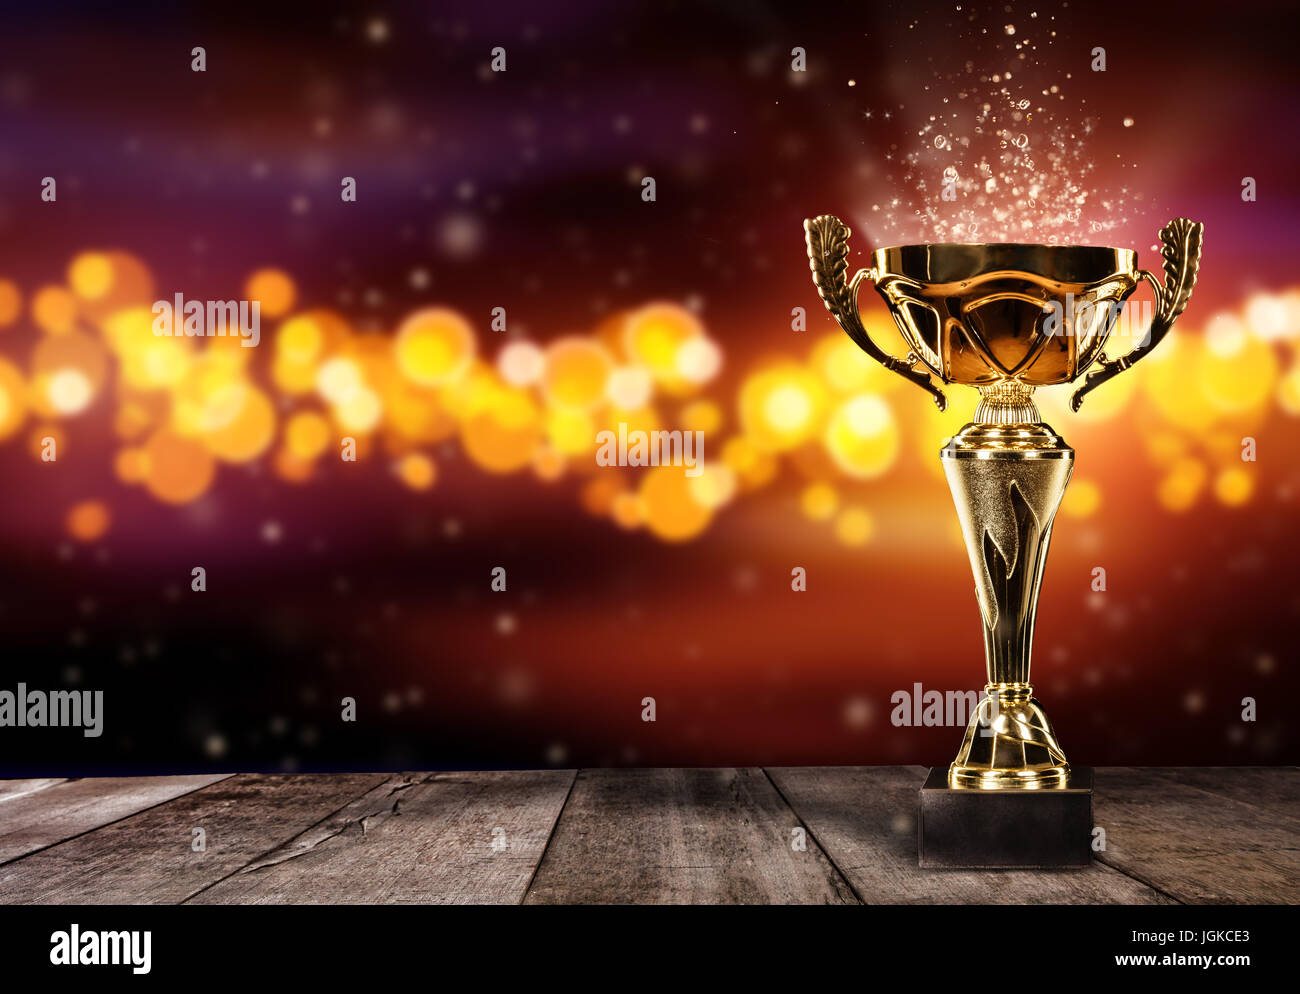 Champion golden trophy on wood table with blur spot lights on background.  Copyspace for text, wide banner format. Concept of success and achievement  Stock Photo - Alamy